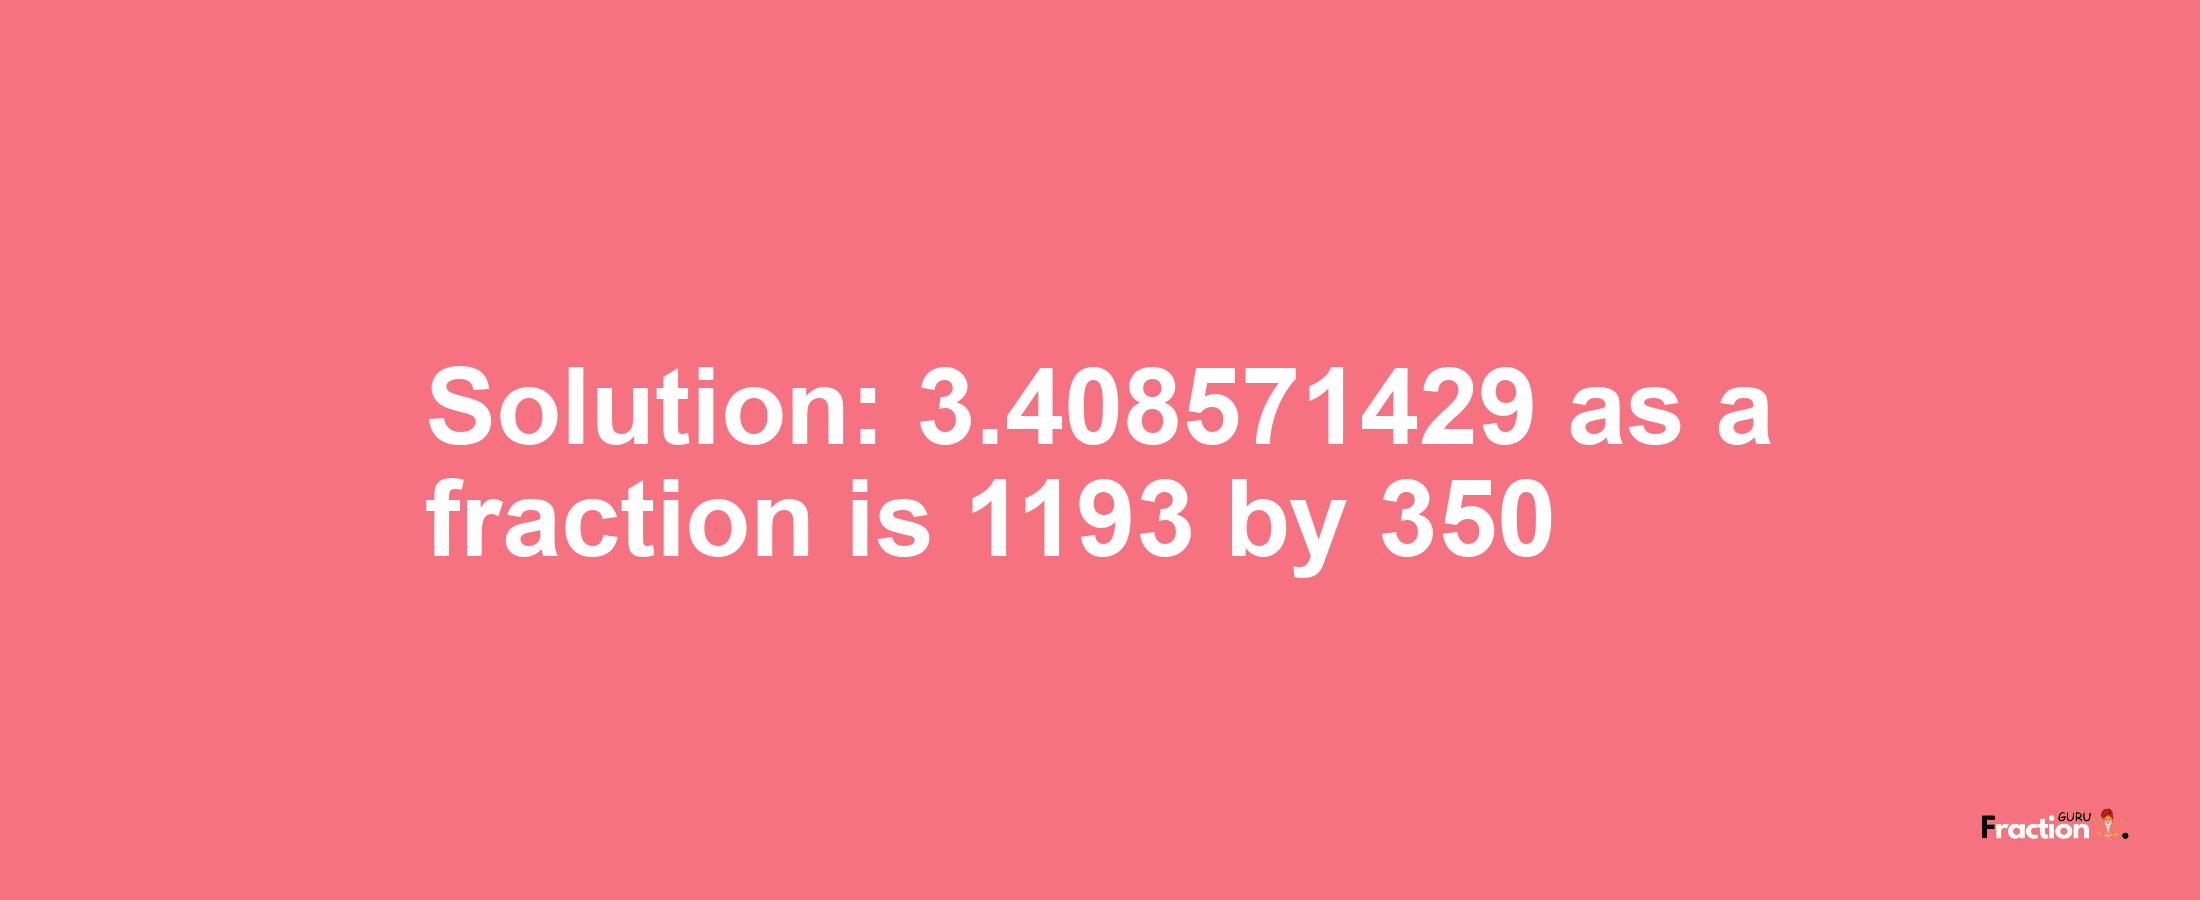 Solution:3.408571429 as a fraction is 1193/350